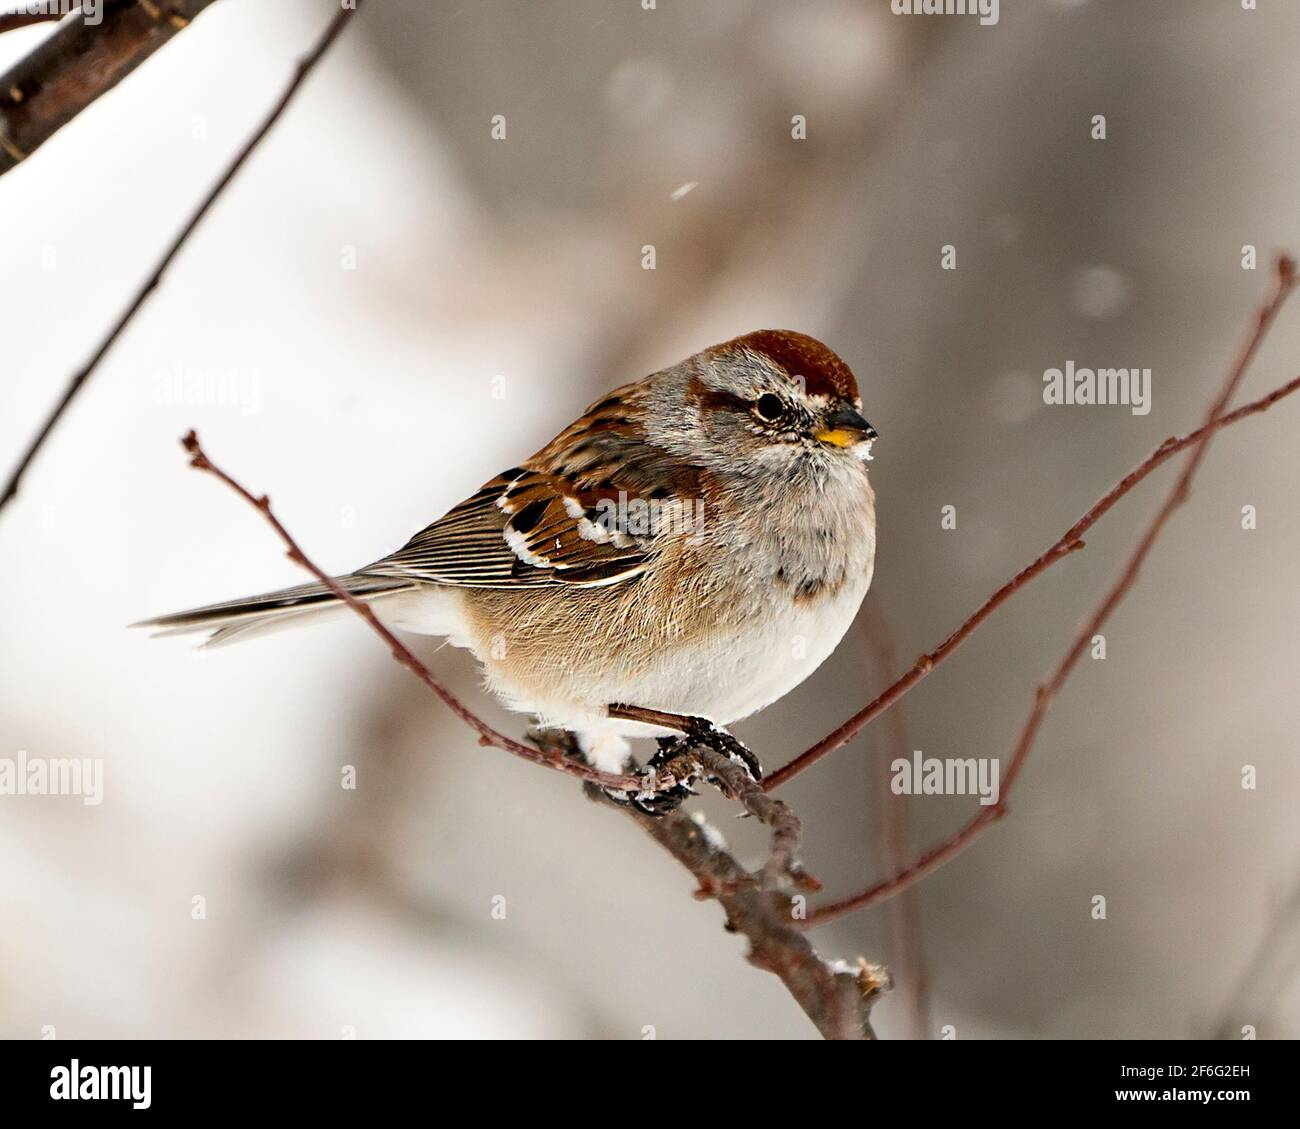 Common Red poll bird perched on a branch in the winter season with falling snow on its feathers and enjoying its environment and habitat. Image. Stock Photo